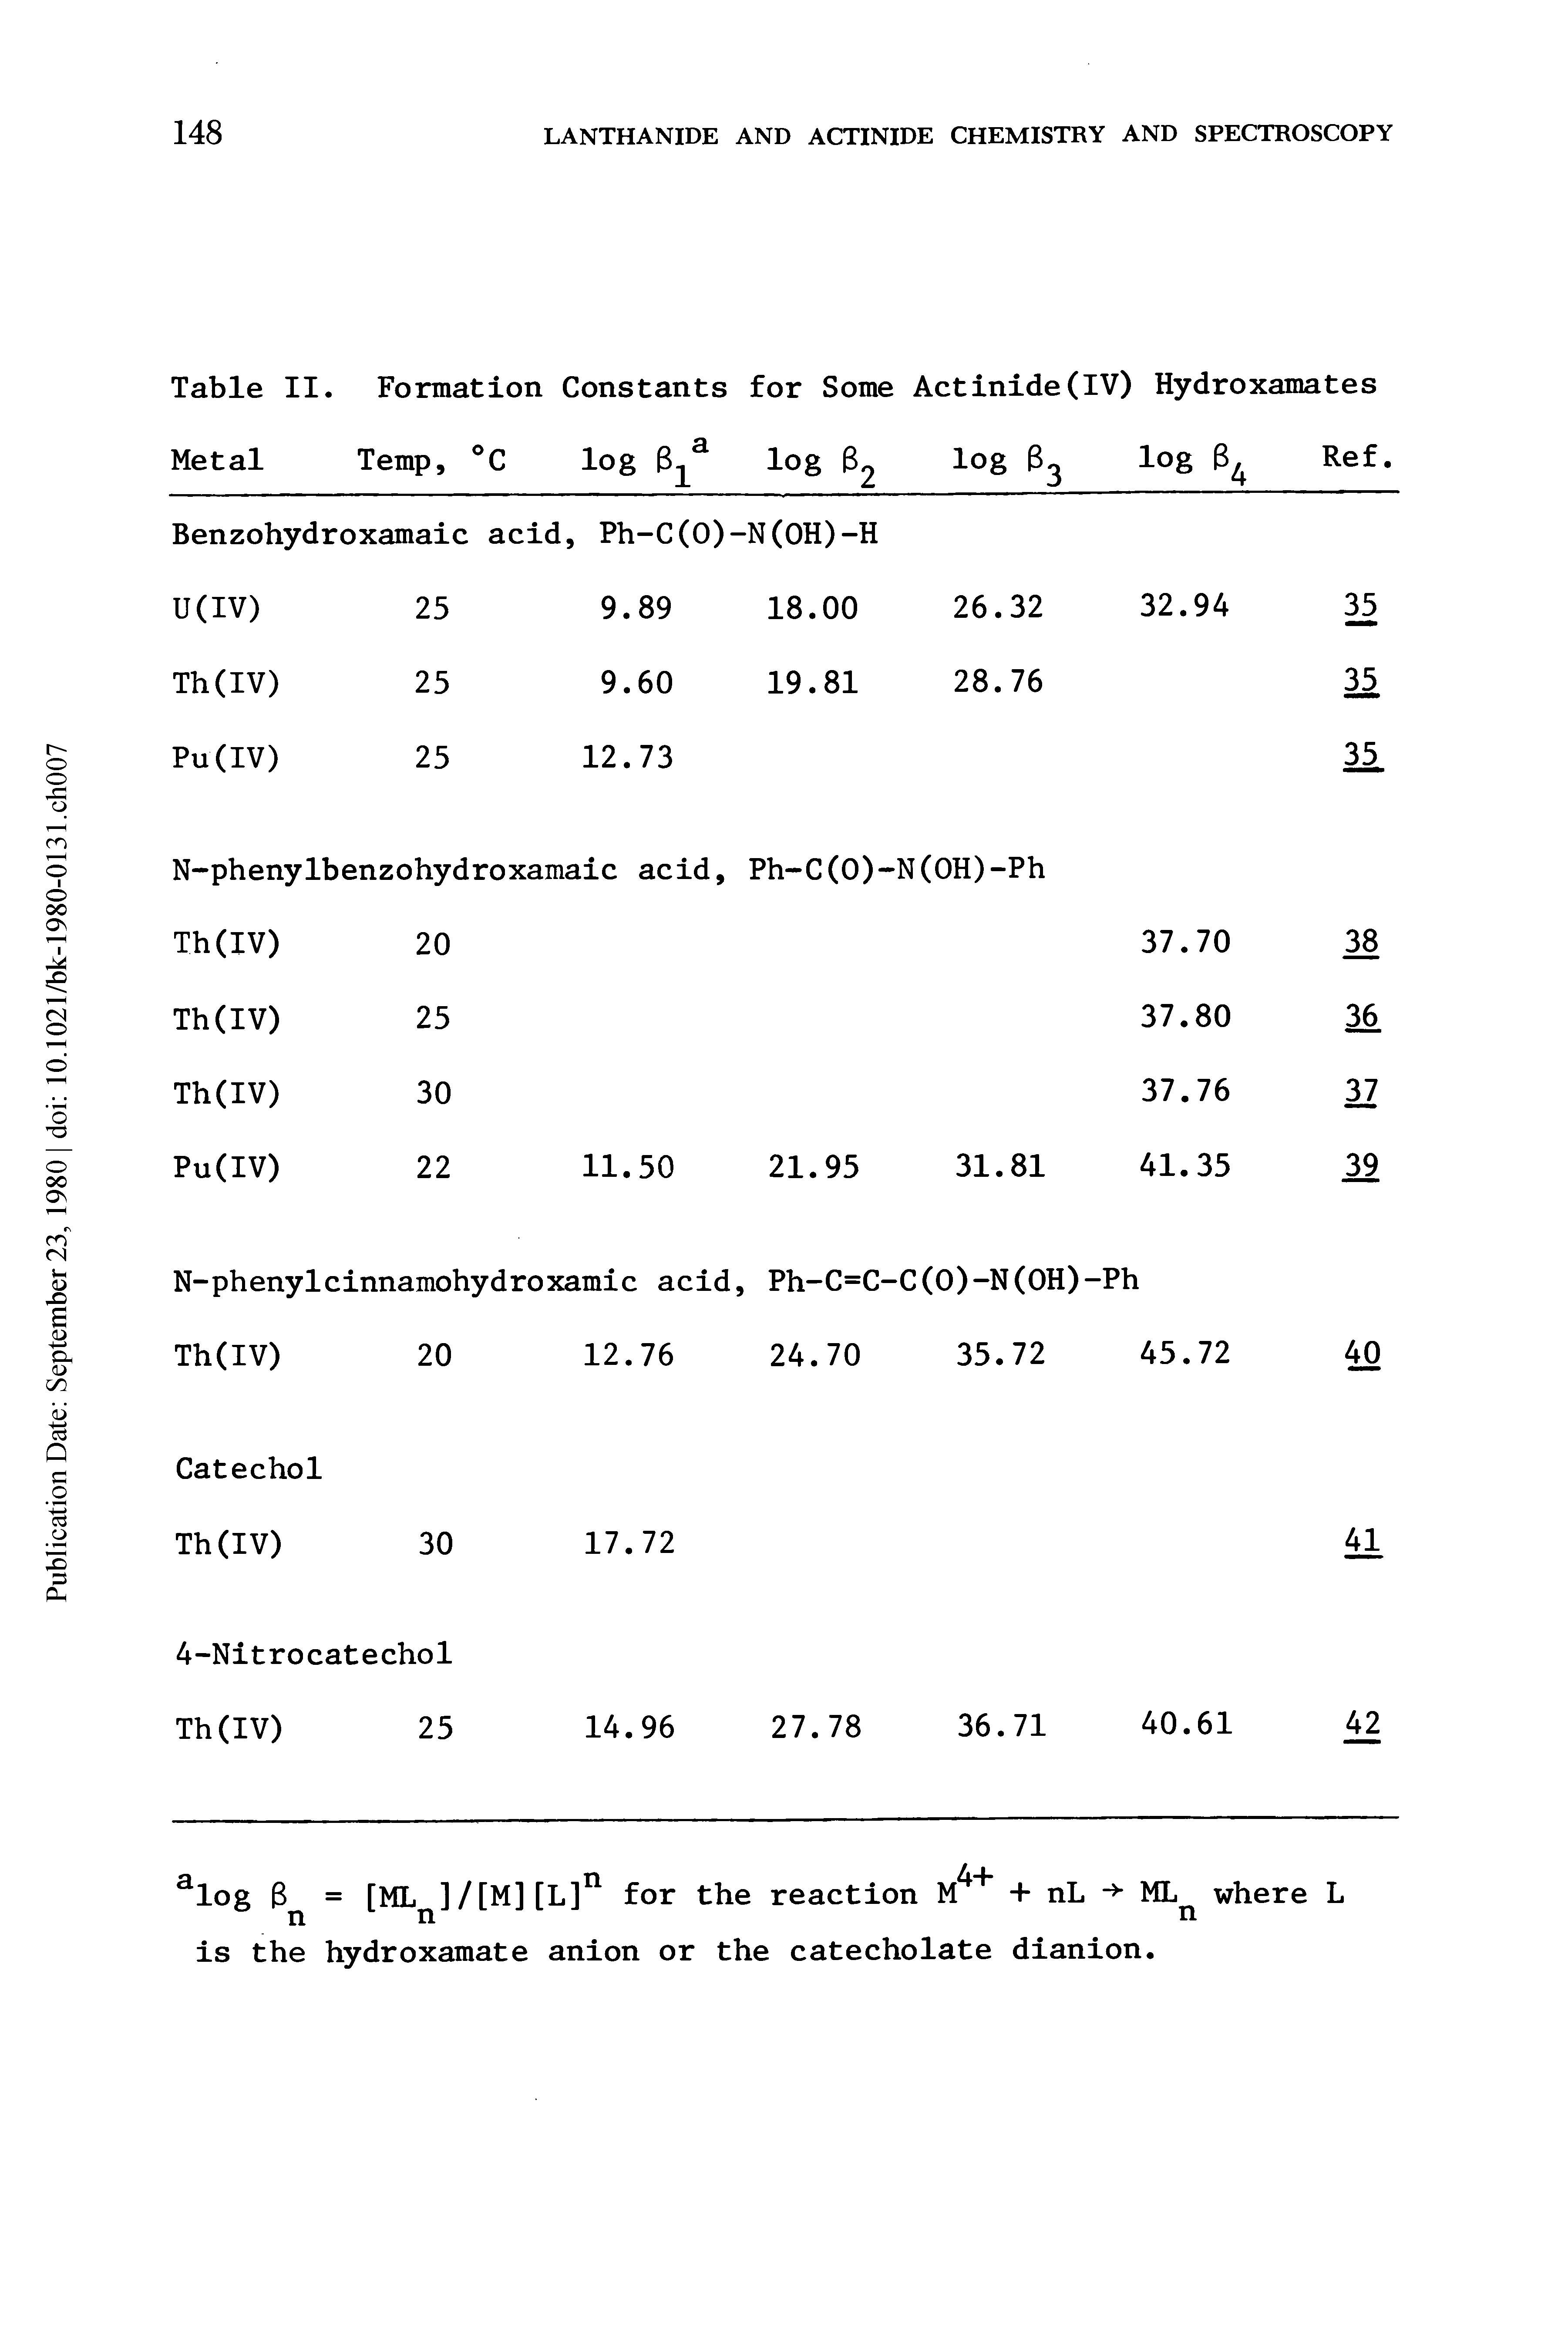 Table II. Formation Constants for Some Actinide(IV) Hydroxamates ...